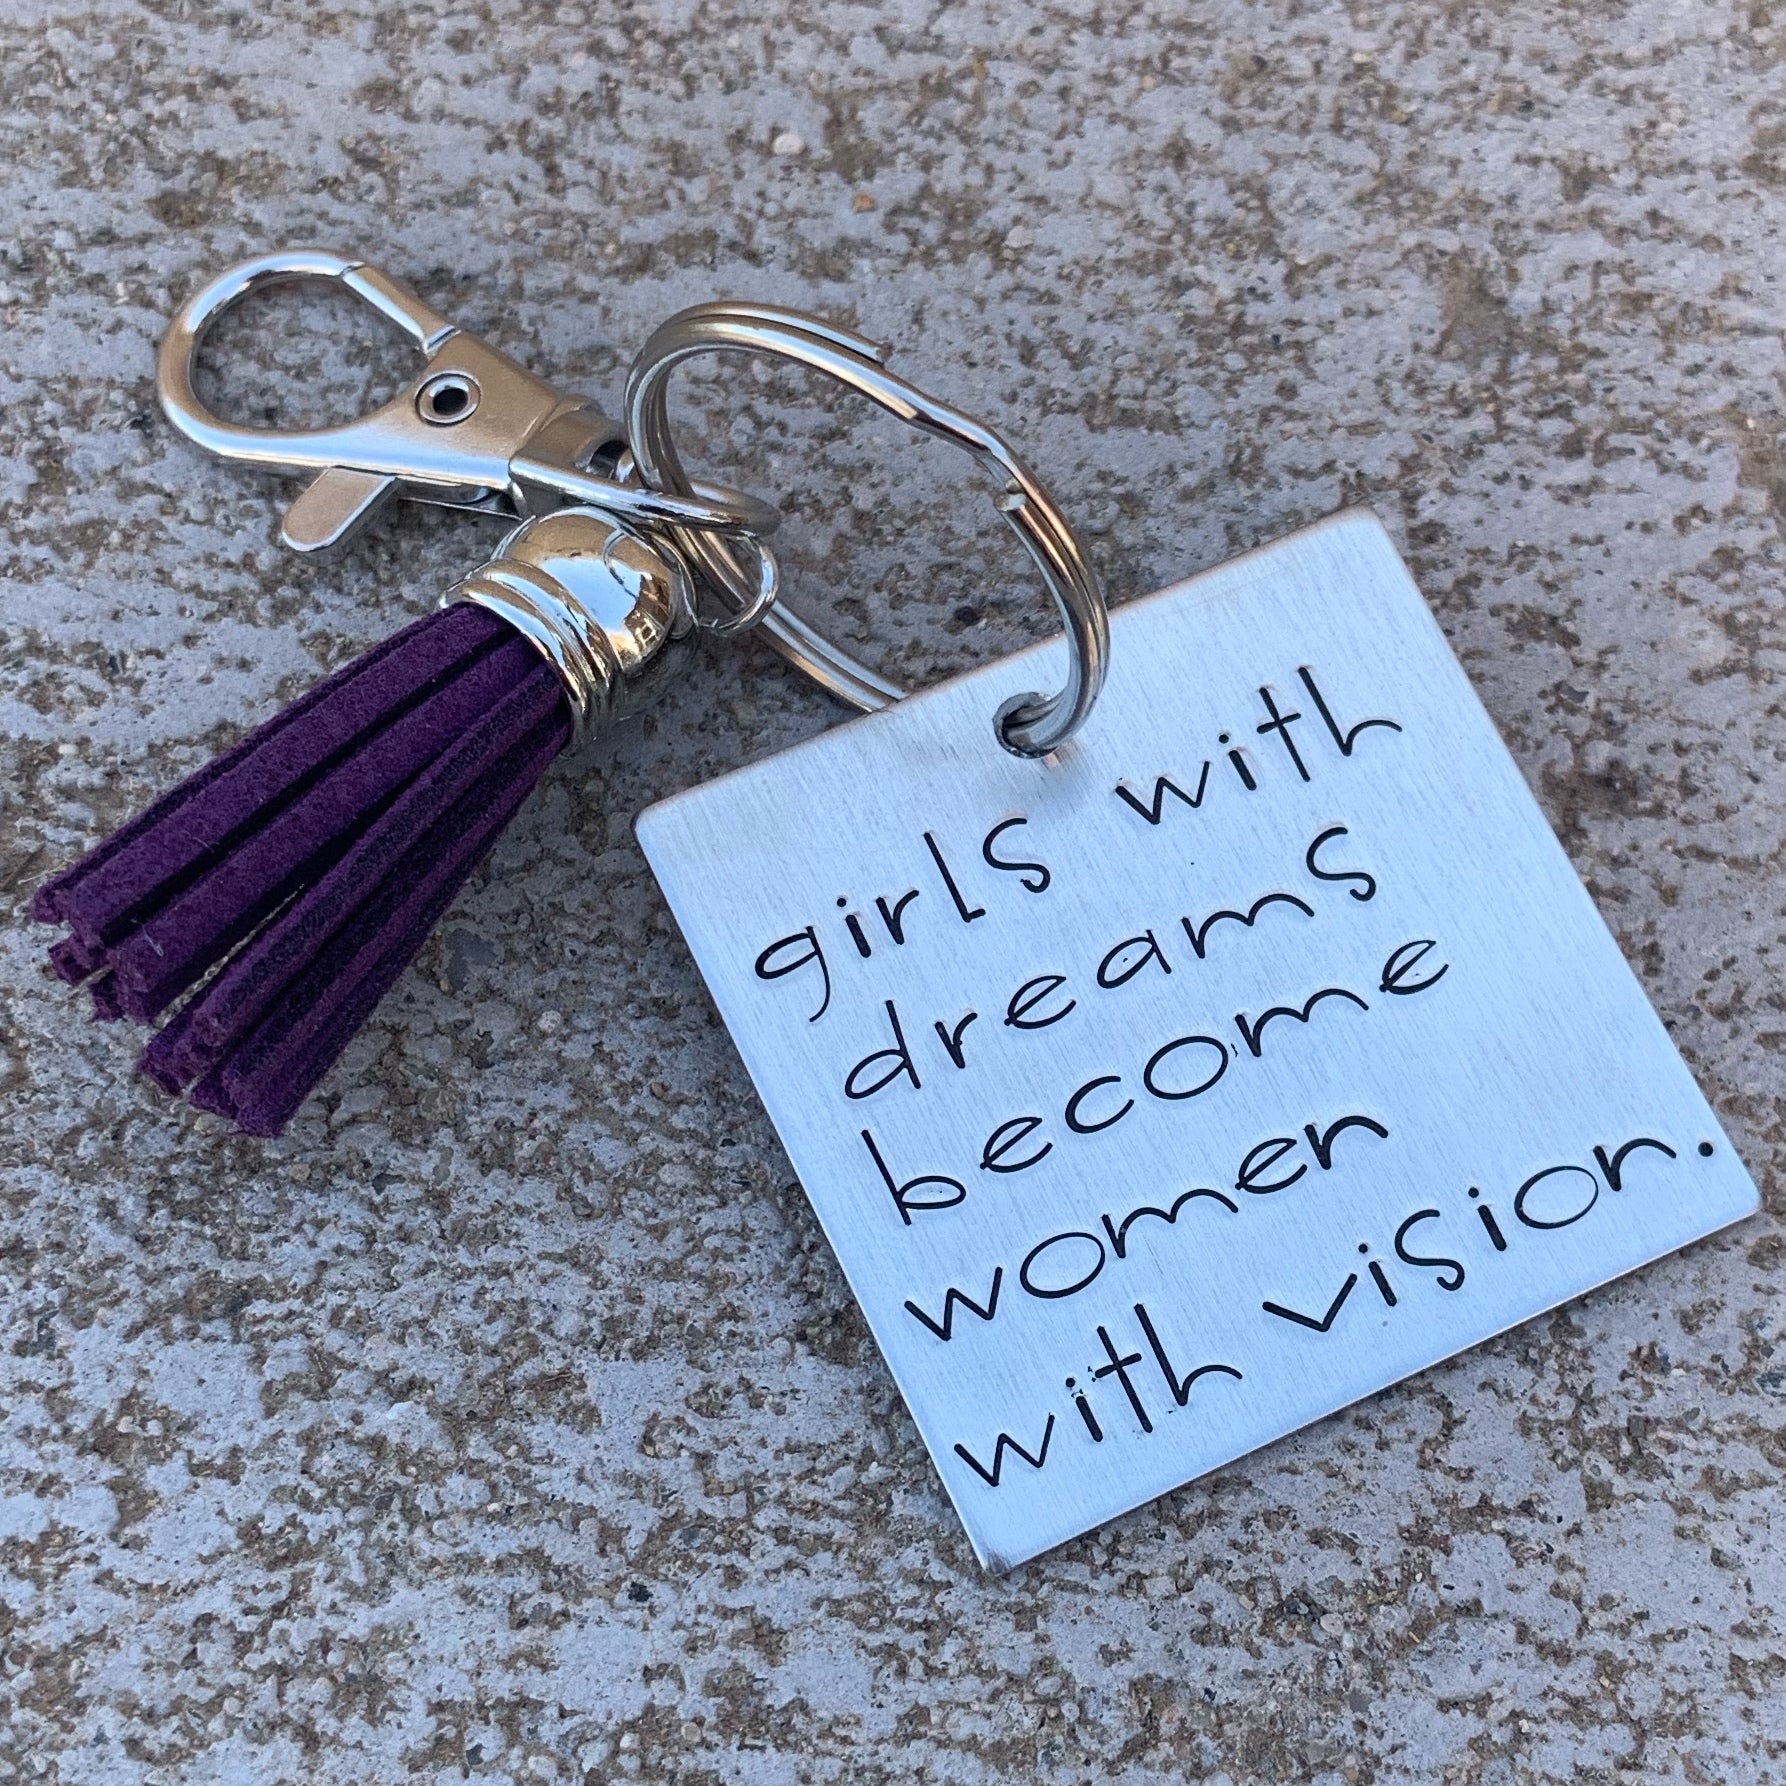 square keychain - girls with dreams become women with vision